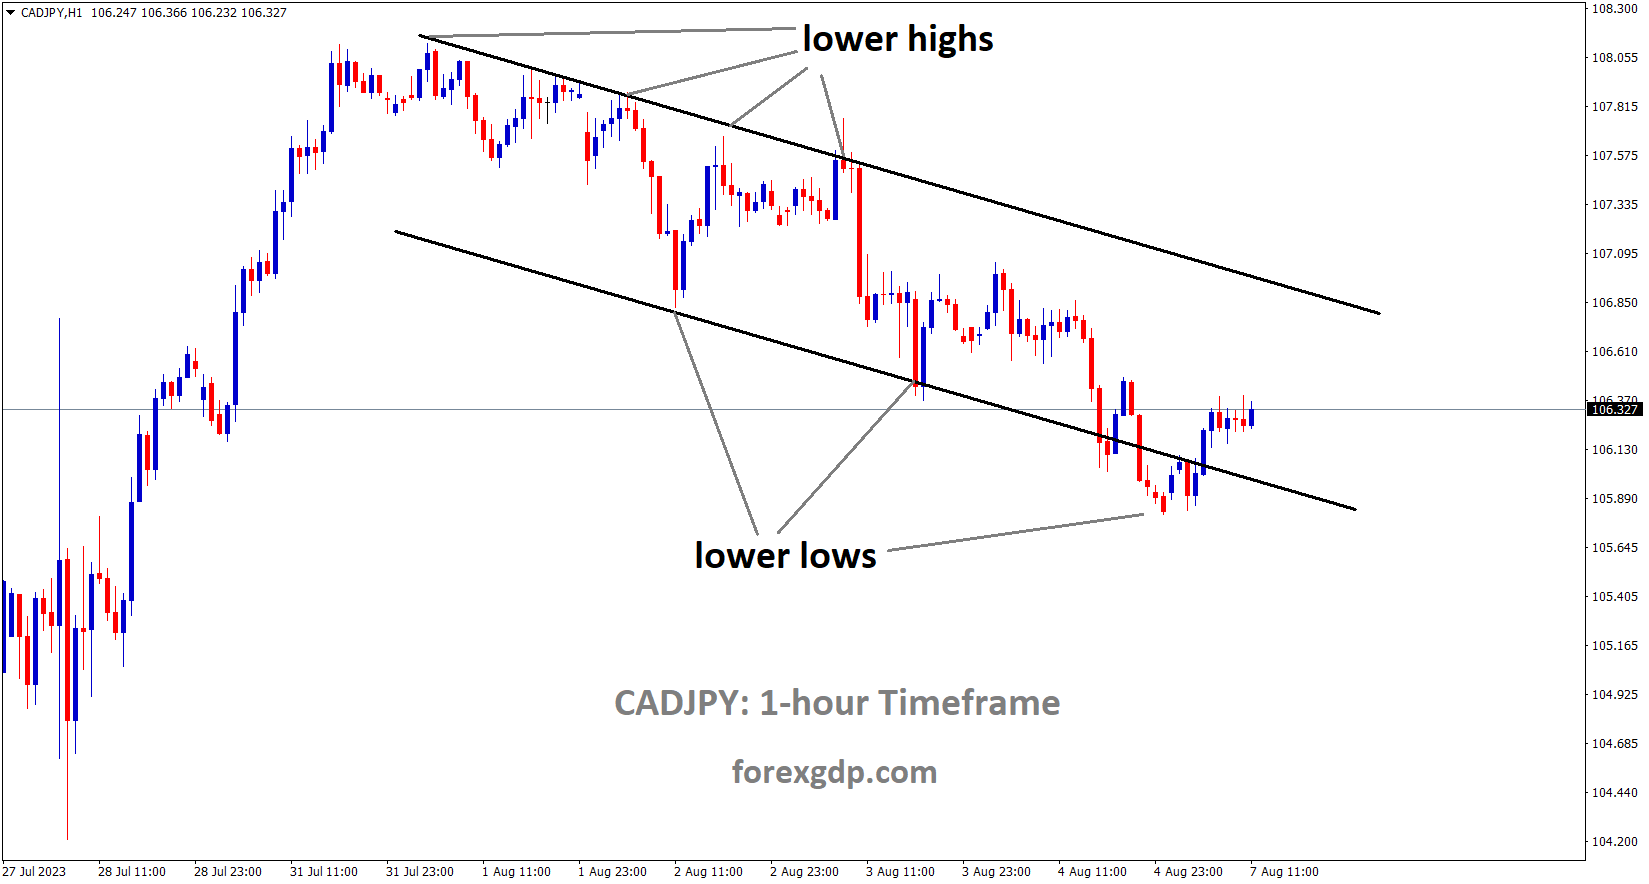 CADJPY is moving in the Descending channel and the market has rebounded from the lower low area of the channel